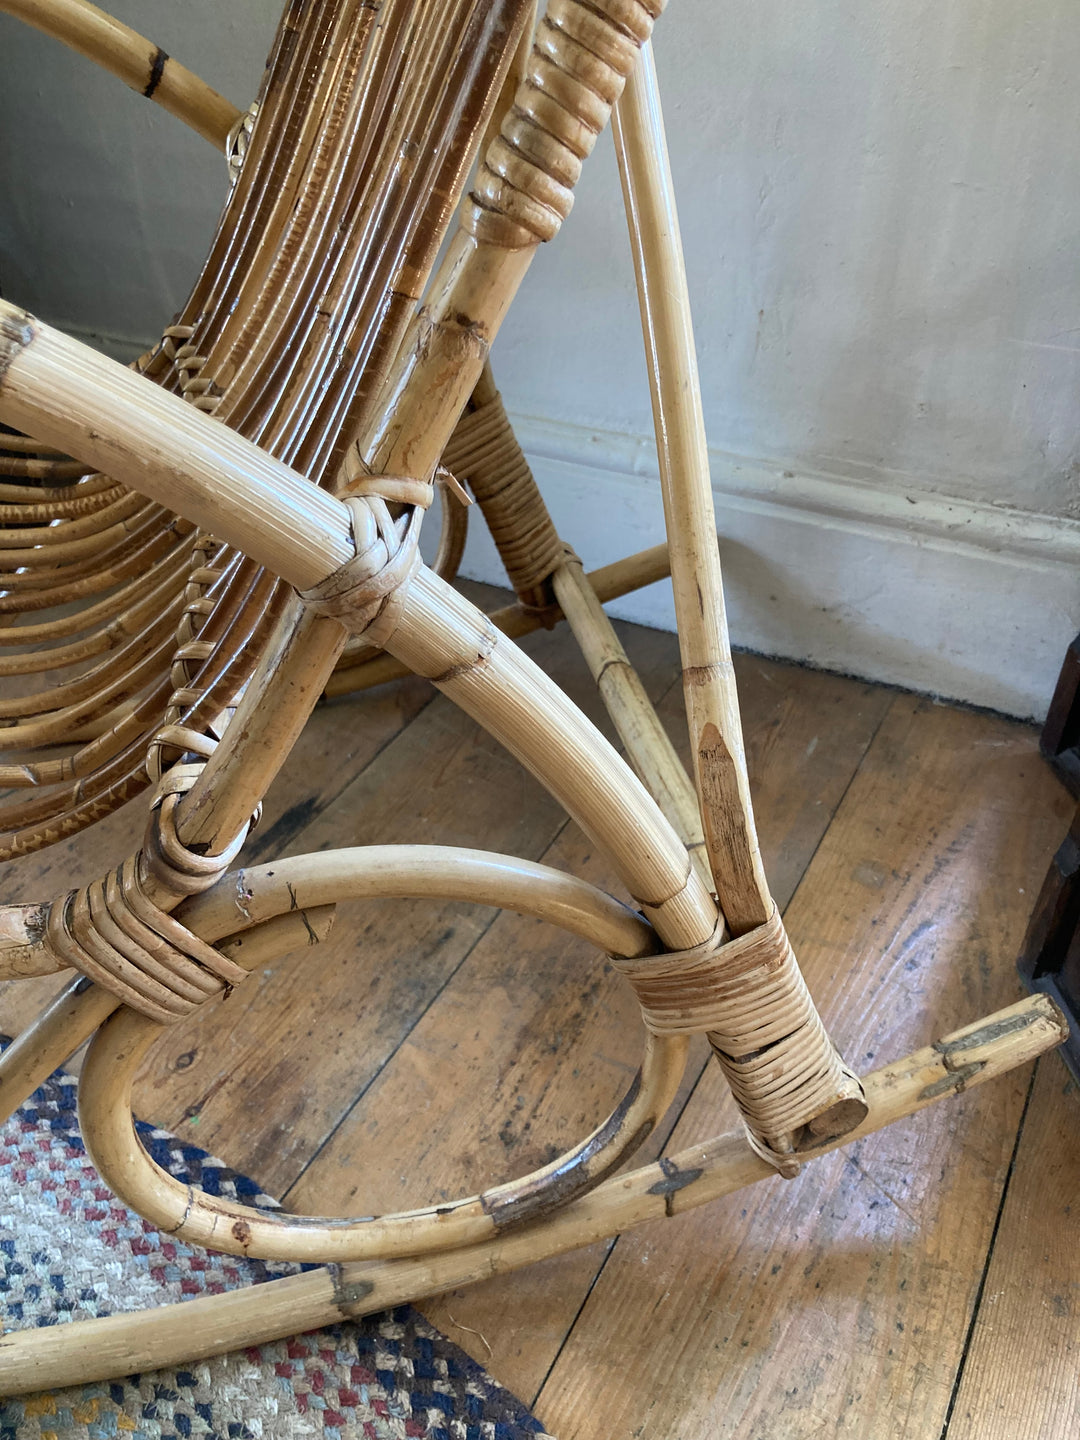 bentwood bamboo and wicker rocker for sale at Source for the Goose, Devon